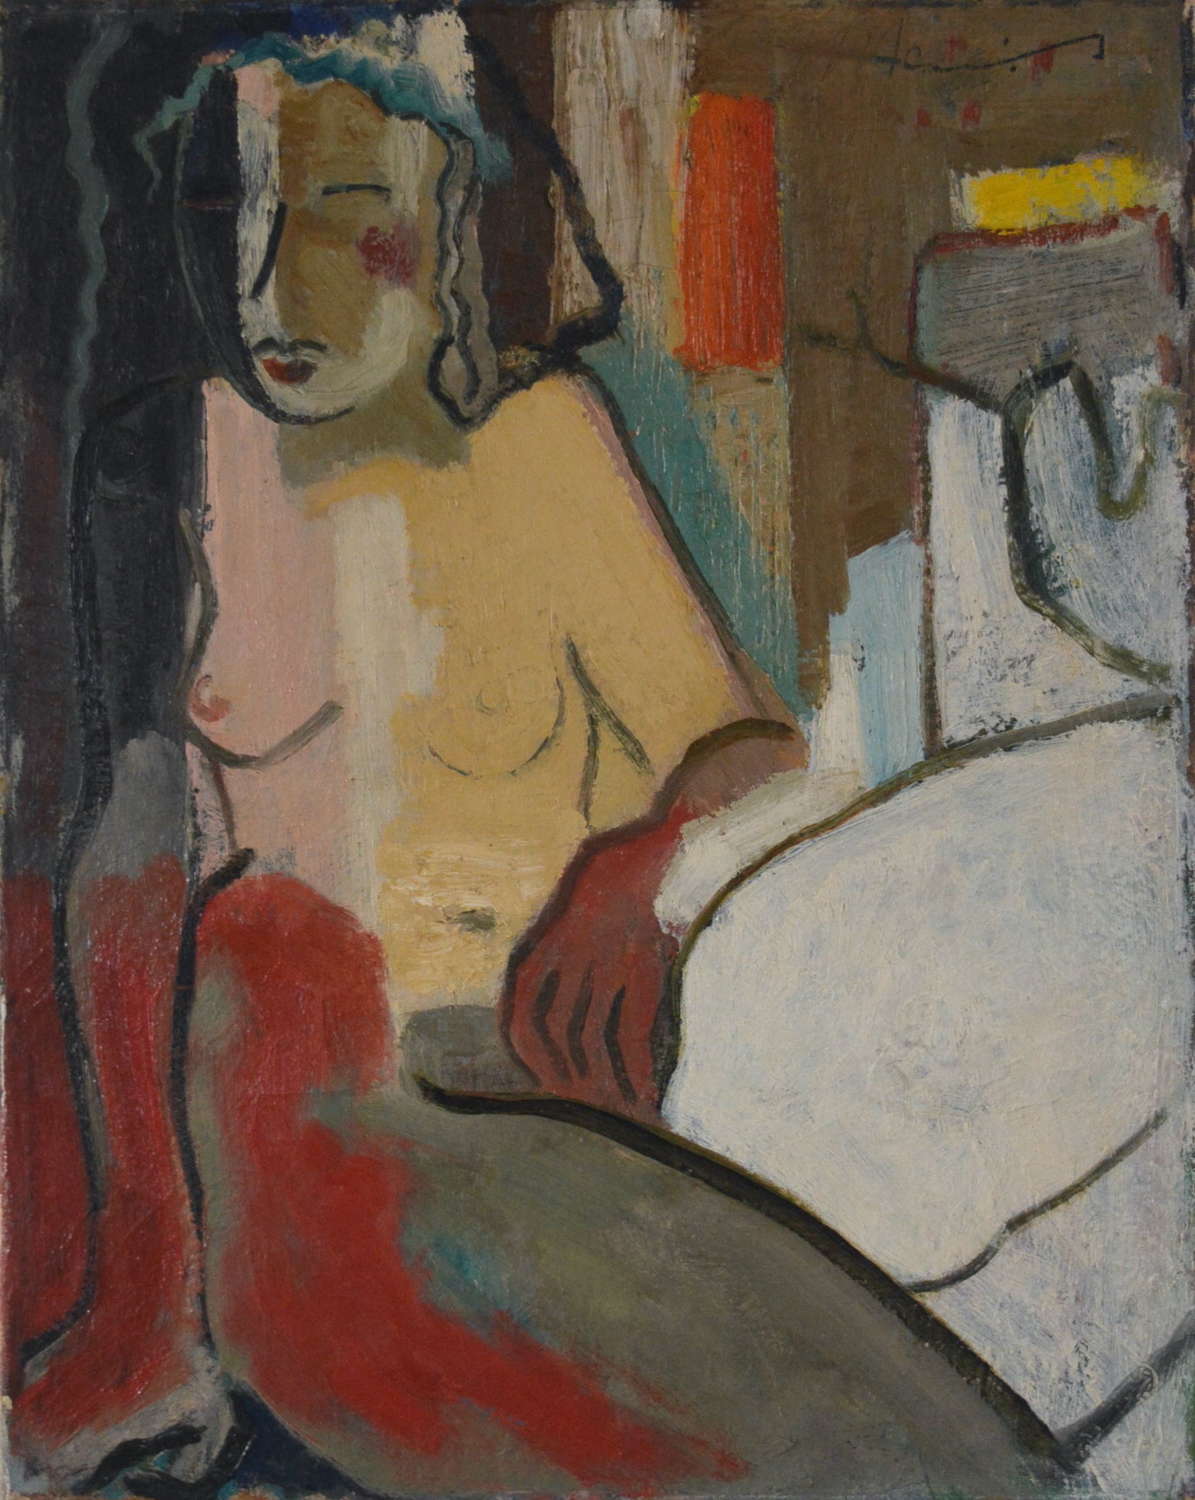 MID 20TH CENTURY ABSTRACT FIGURE STUDY BY HARRIE HEINEMANS